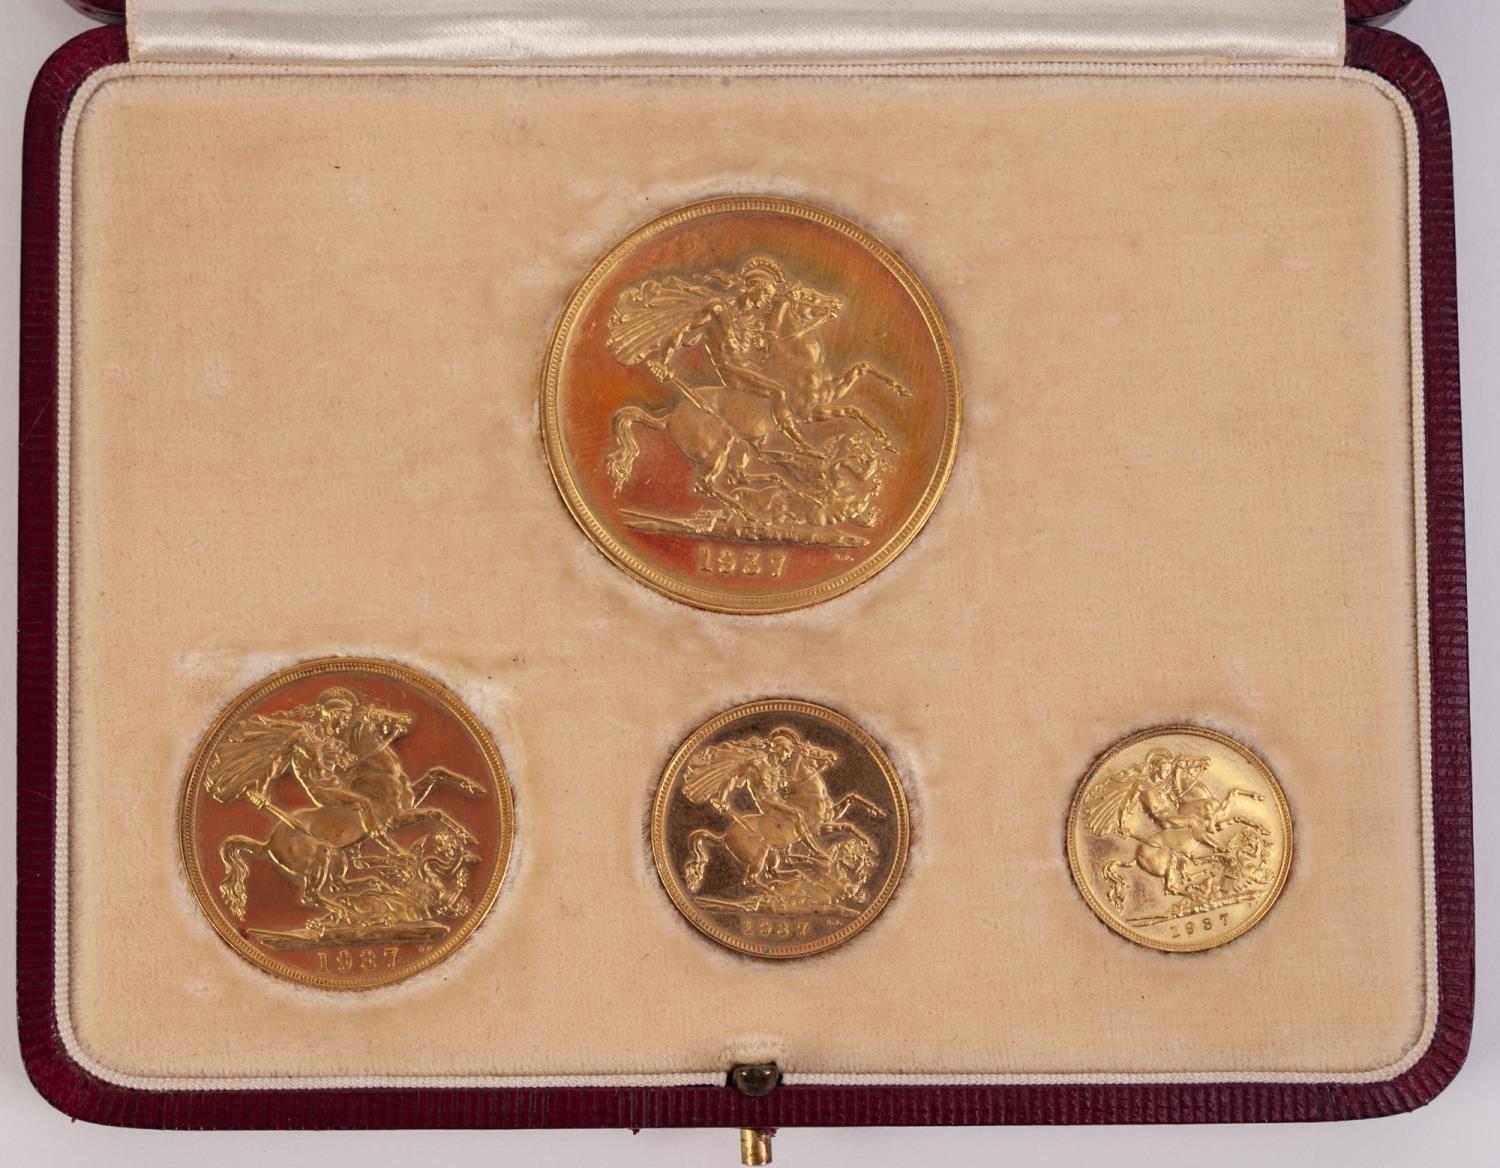 GEORGE VI 1937 SET OF FOUR GOLD COINS, viz £5, £2, sovereign and half sovereign, in case, - Image 4 of 6